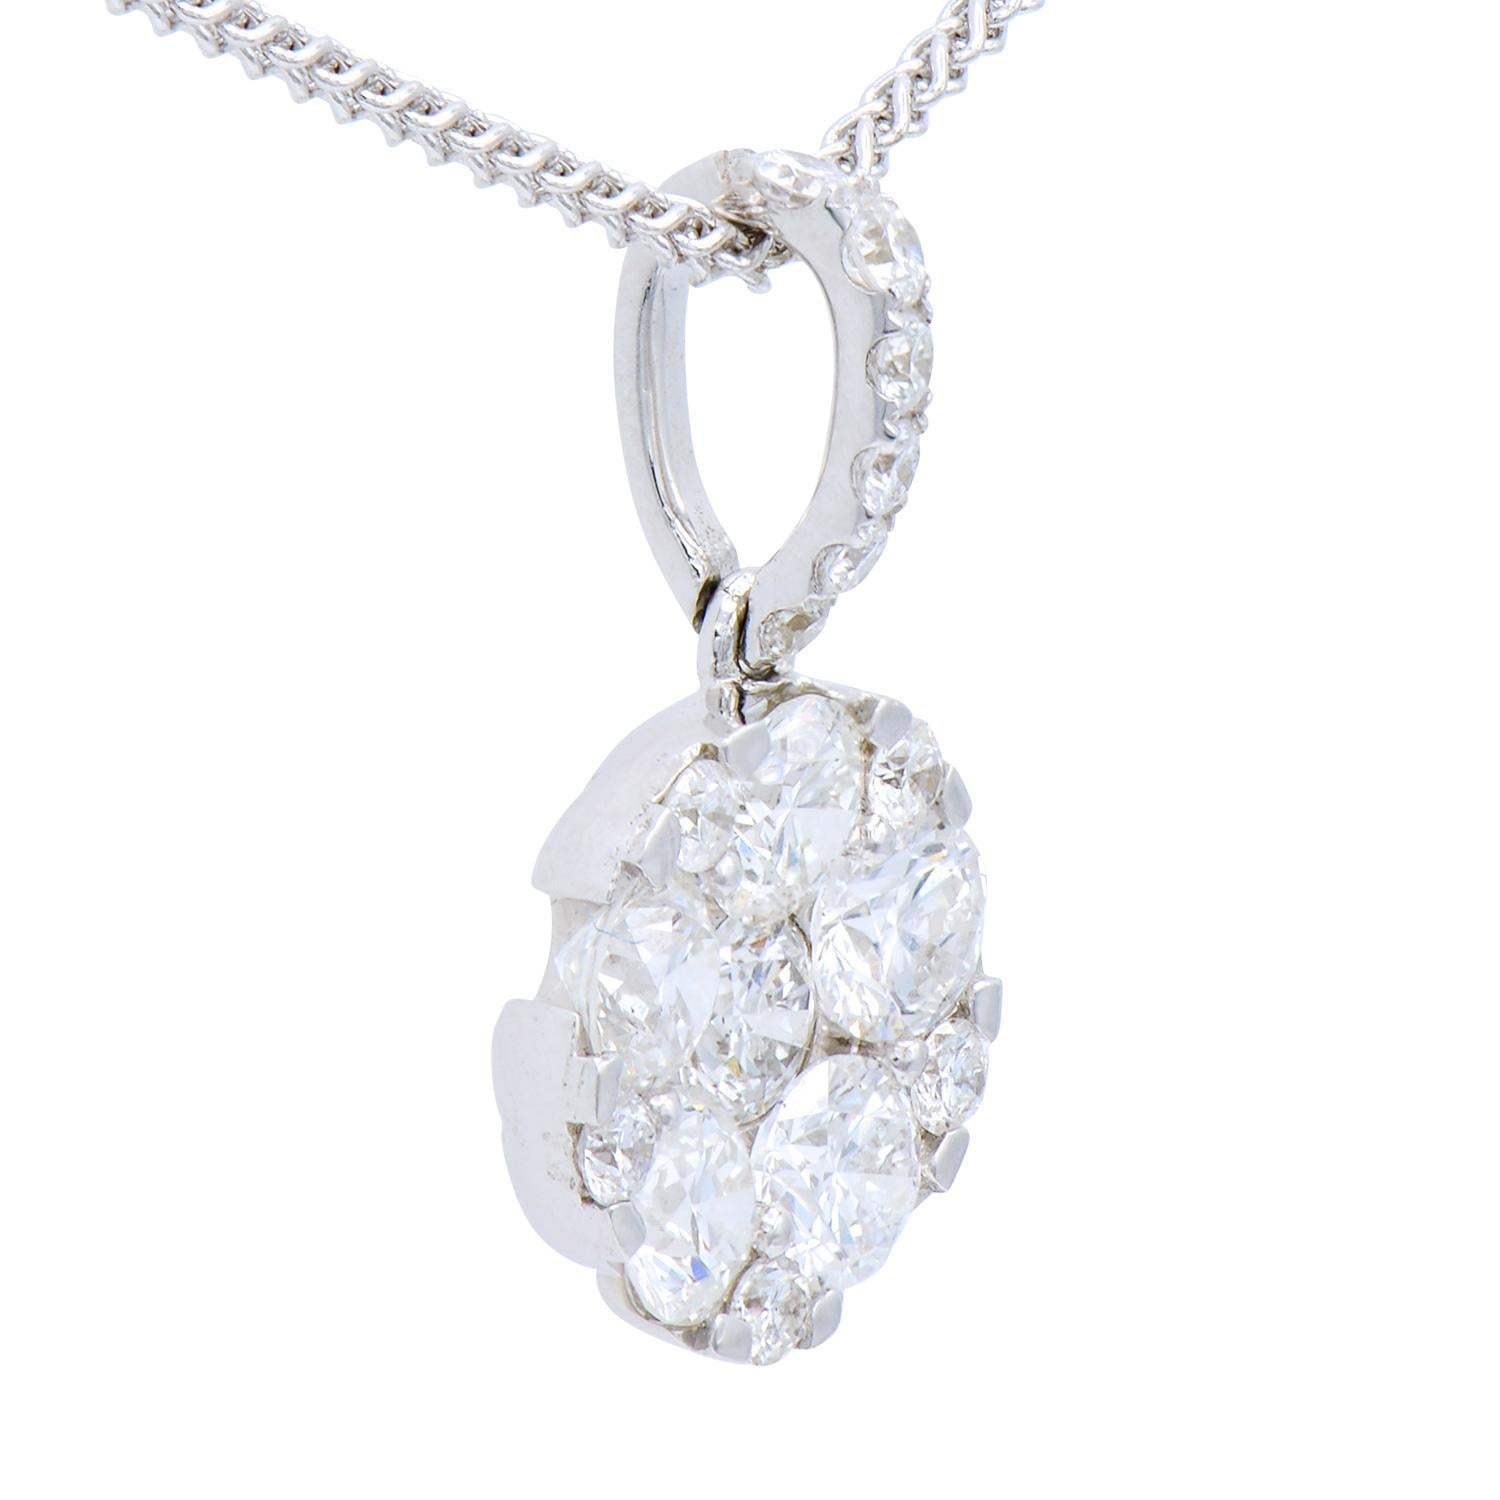 This beautiful circle pendant is made up of 17 diamonds totaling .91 carats, all in VS2, G color. They are set in 1.2 grams of 18 karat white gold with an 18 karat white gold chain as well. This classic look is timeless and the perfect gift.